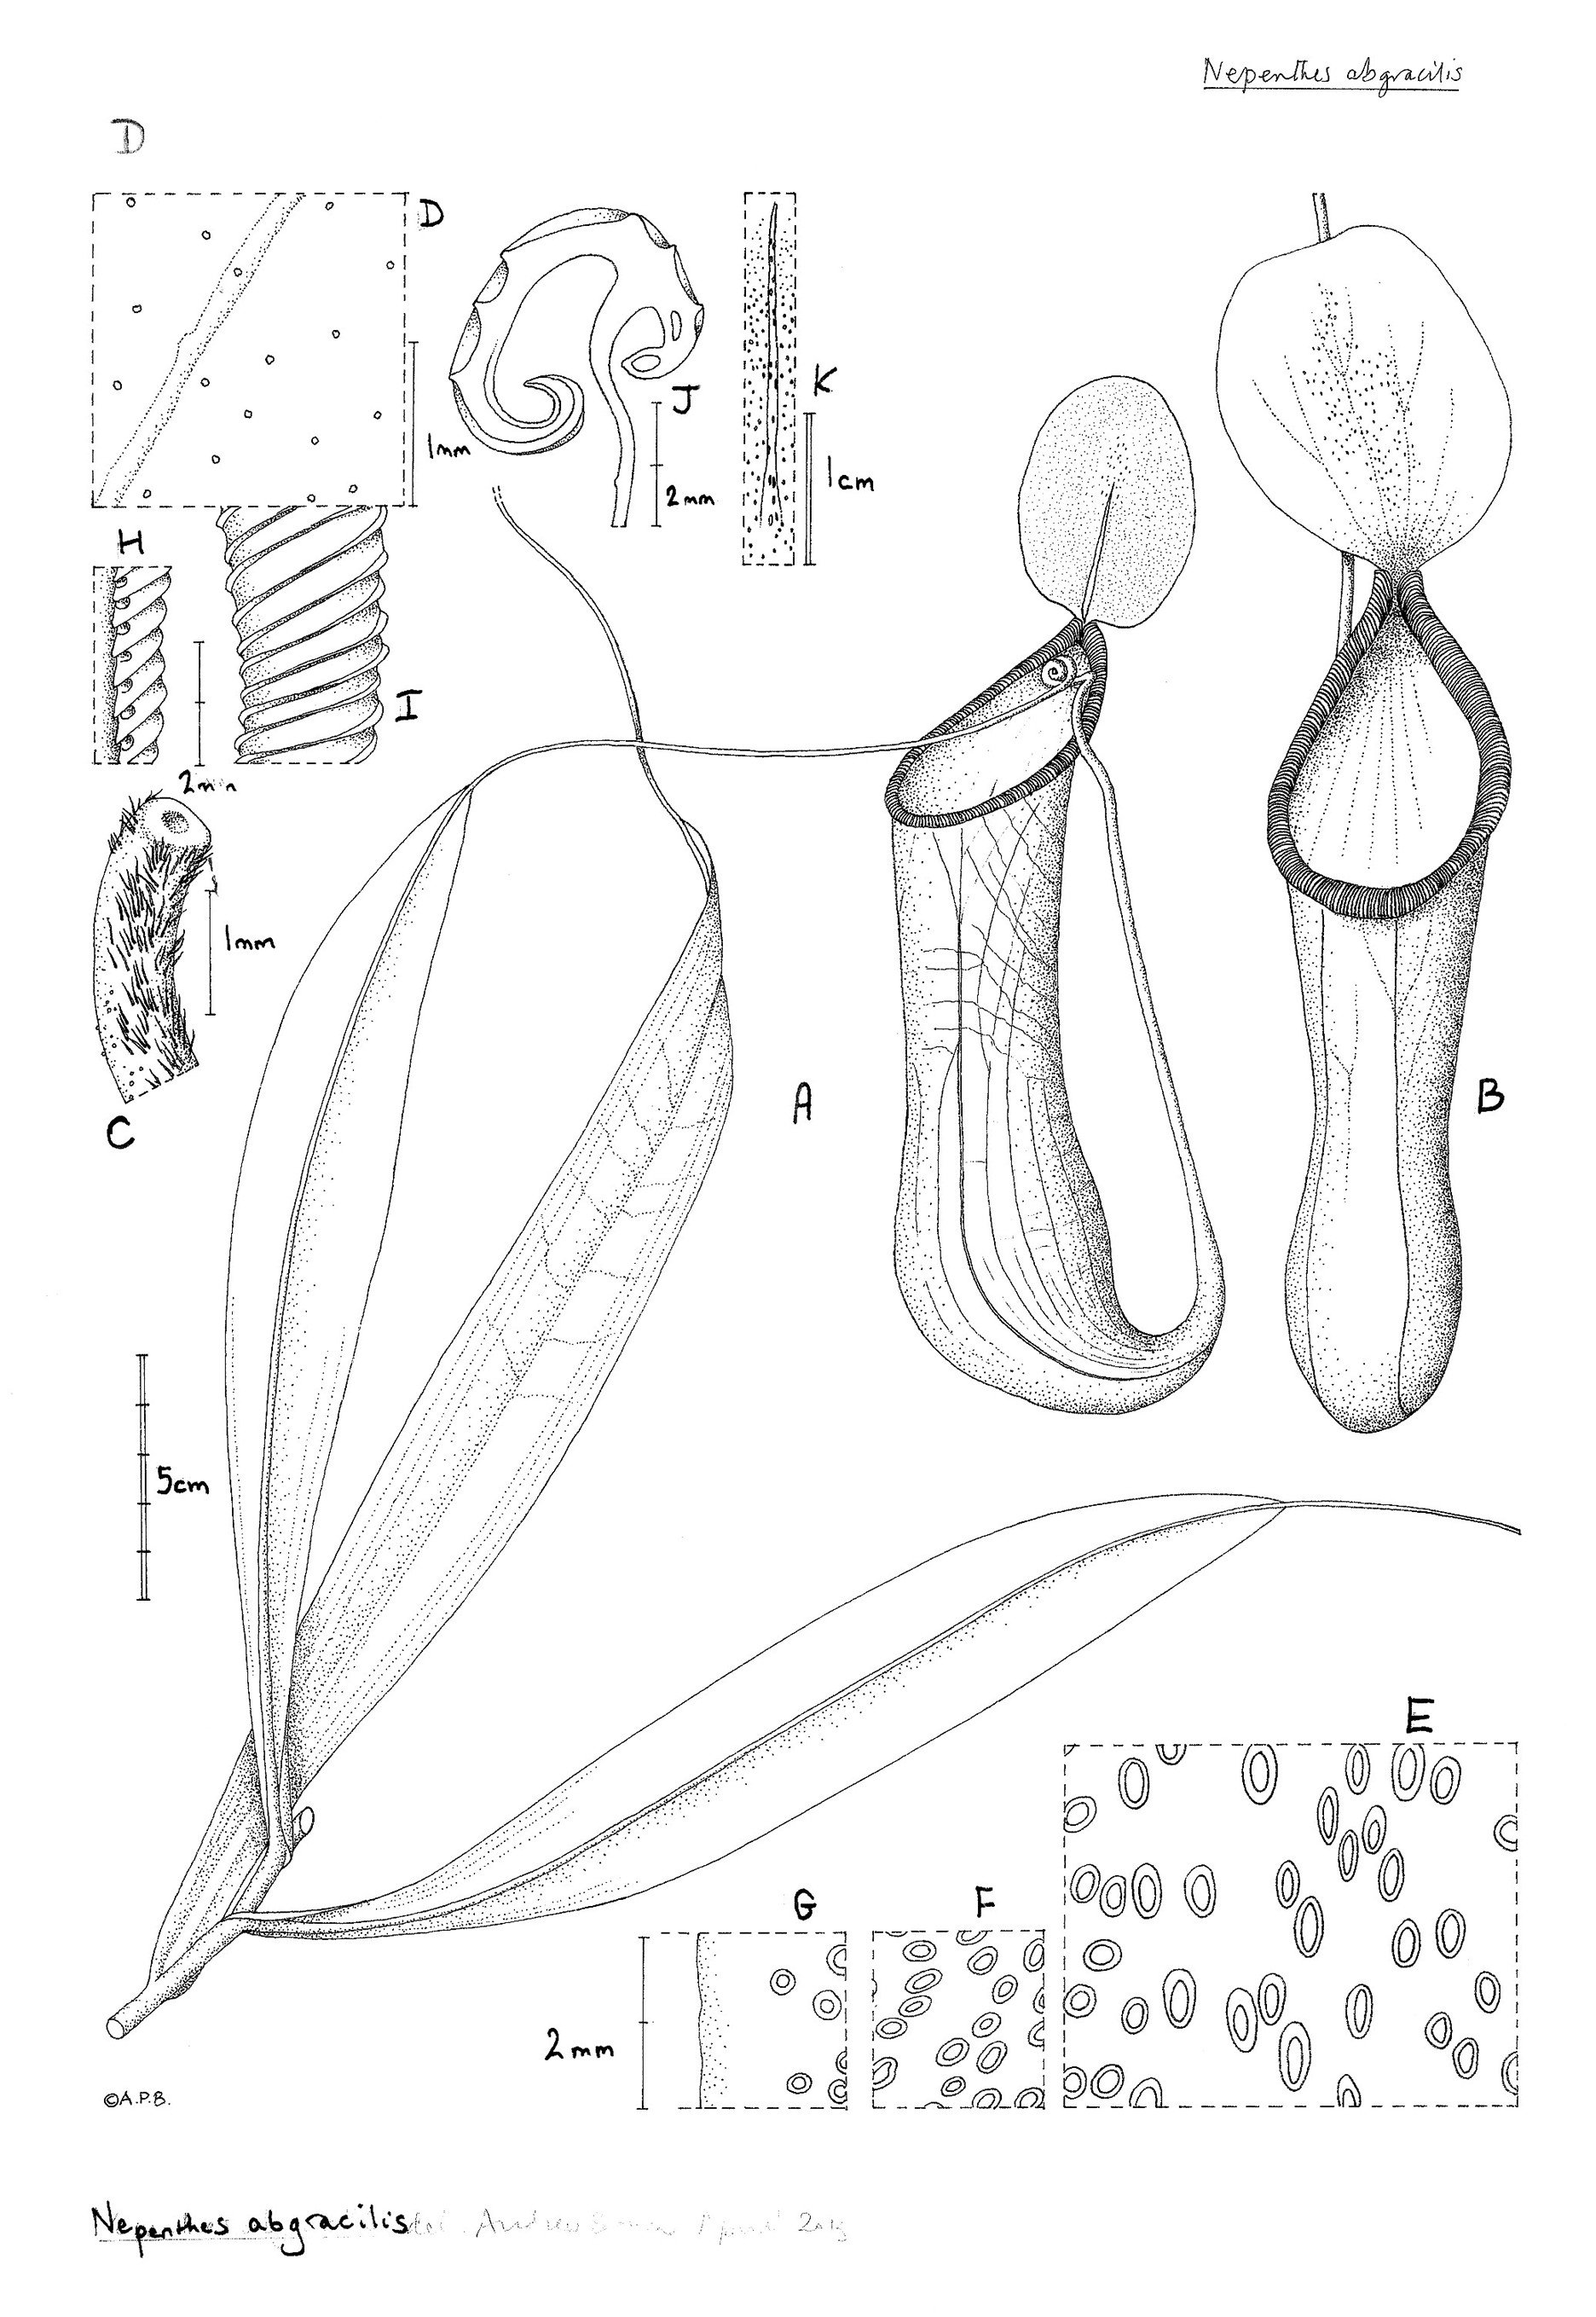 Download List of Nepenthes species - Wikiwand